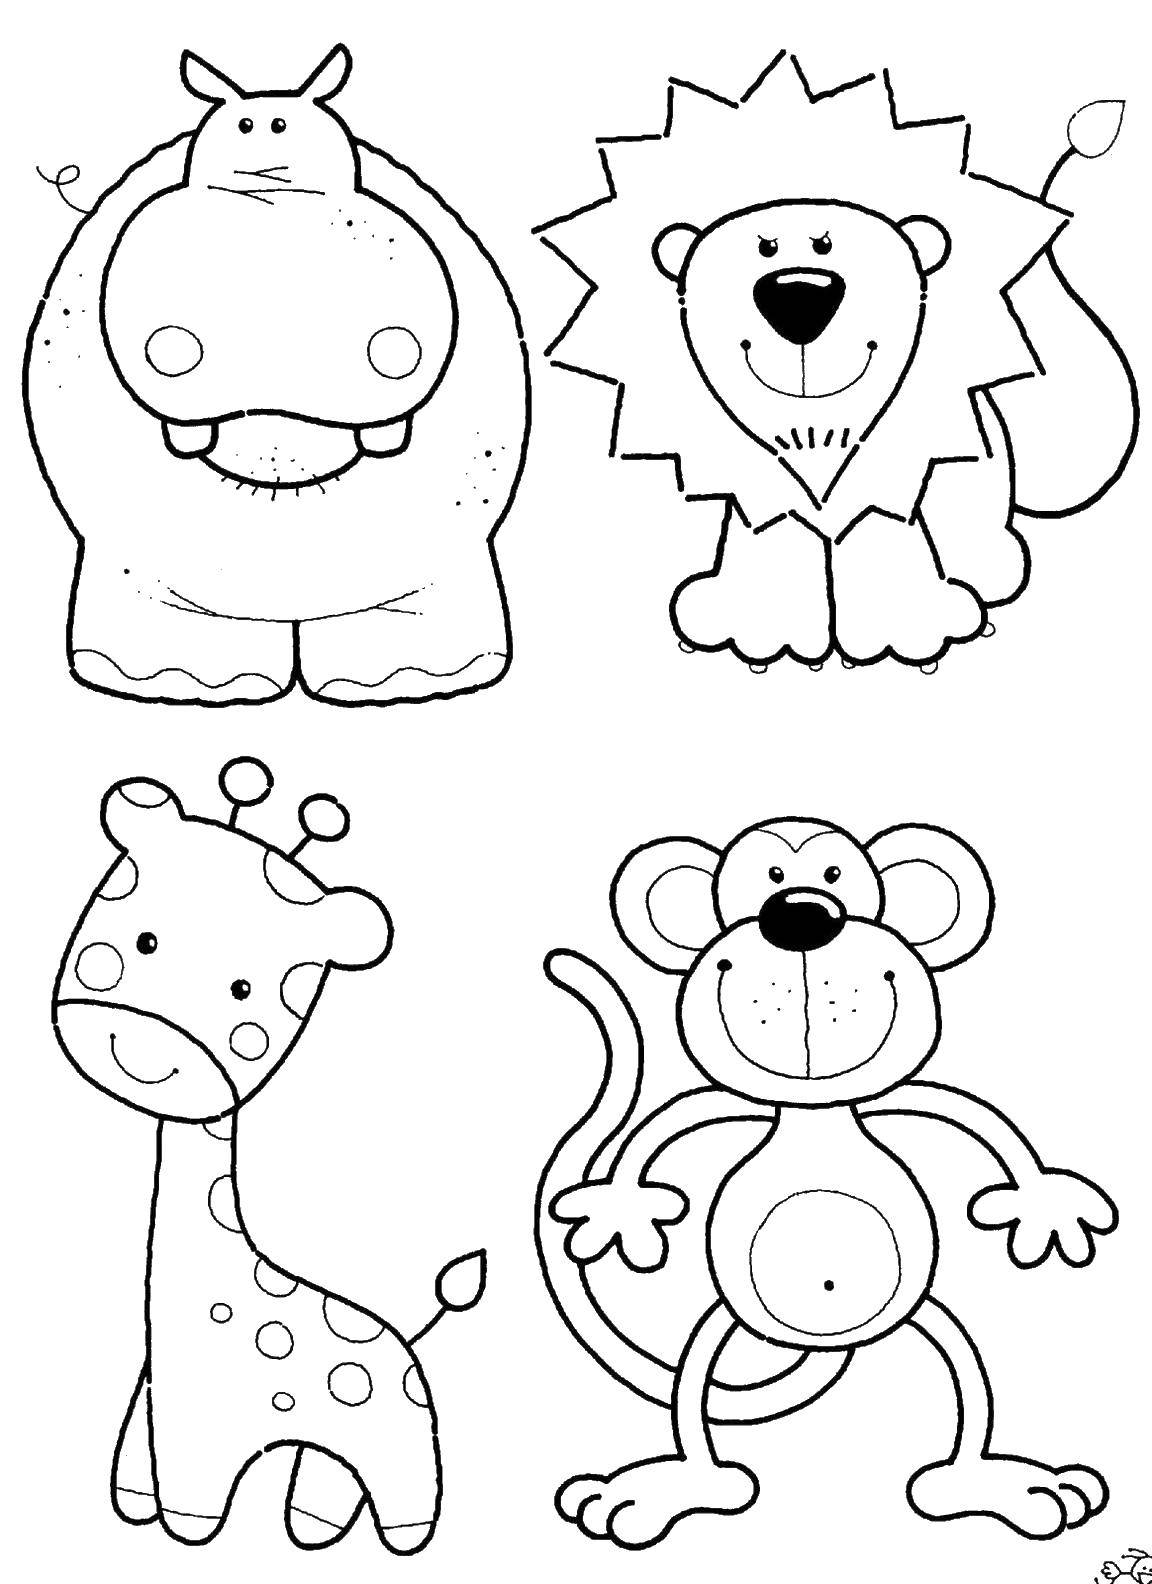 Coloring Lion, Hippo, monkey and ... ... best friends. Category Animals. Tags:  Animals.